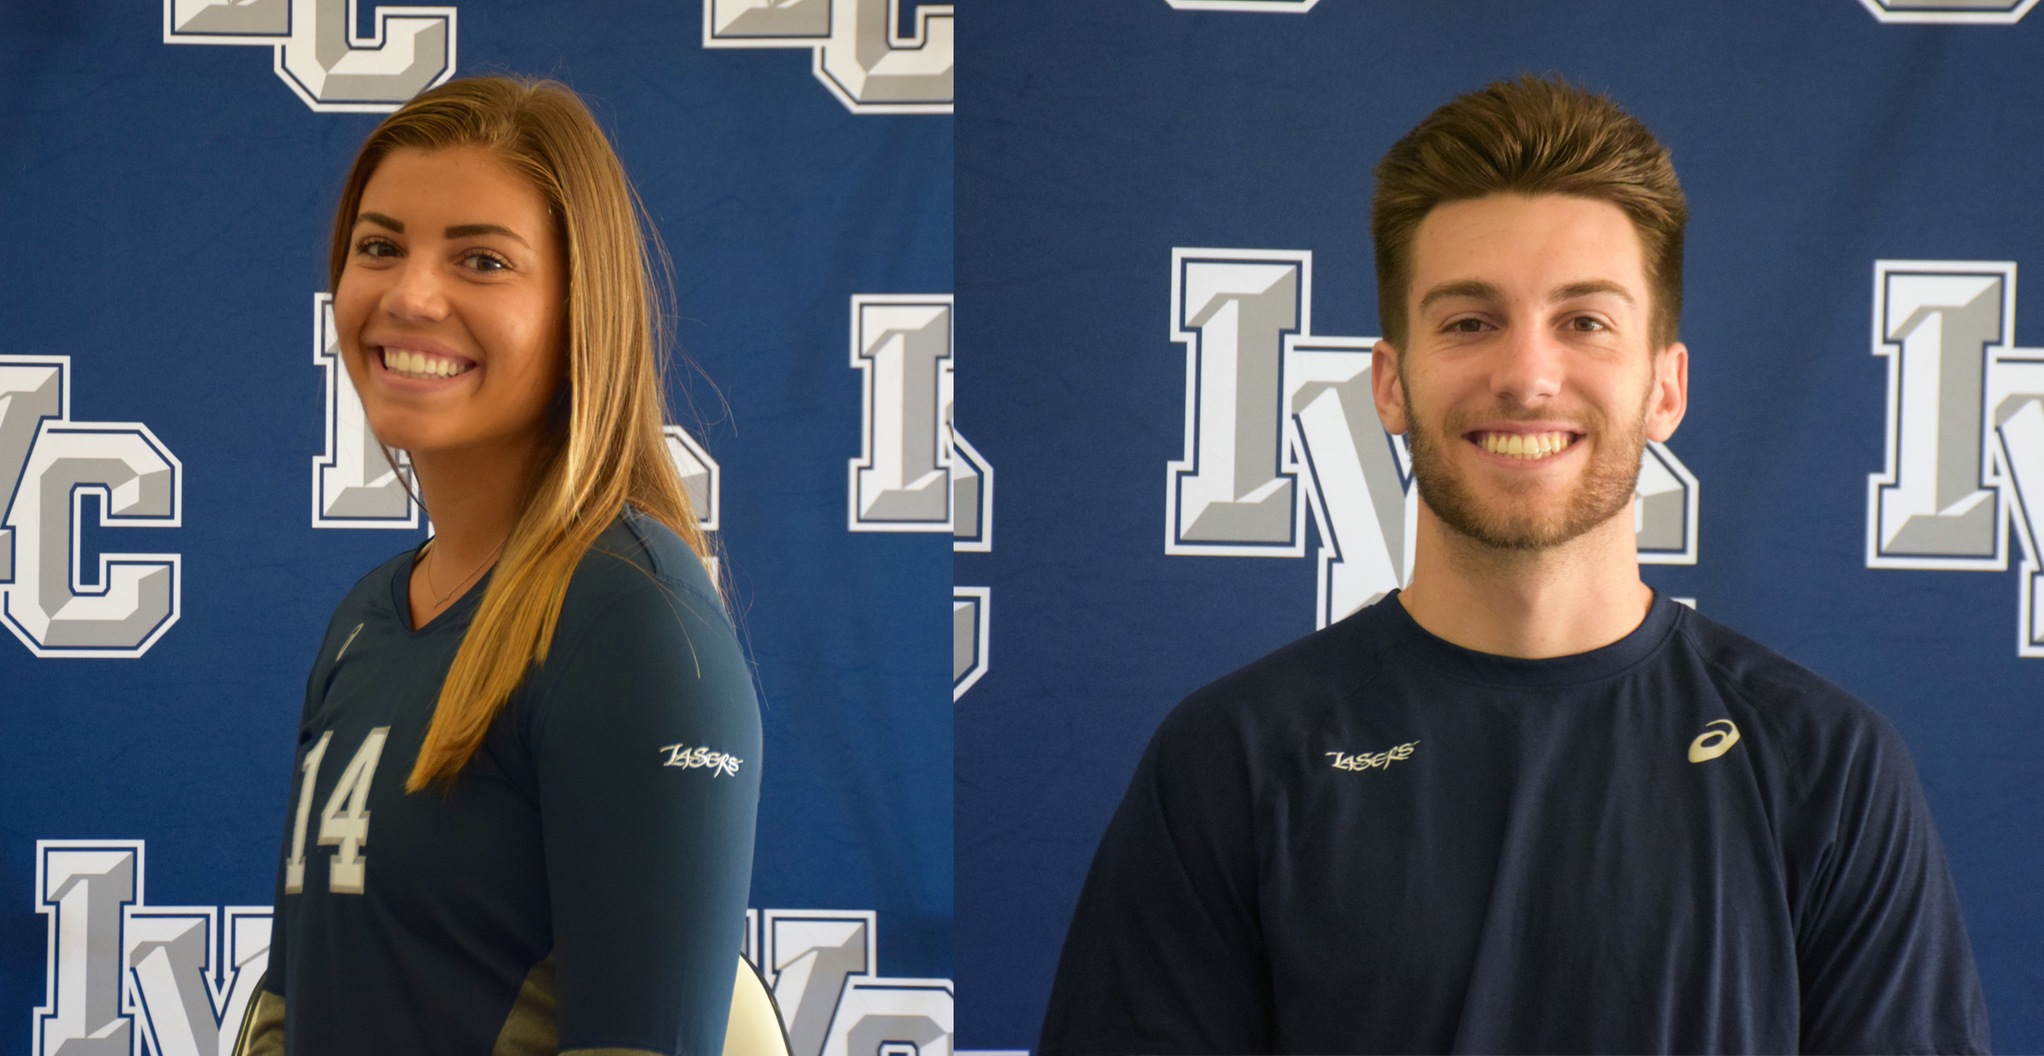 Ramseyer and McBain named IVC's scholar athletes of the year